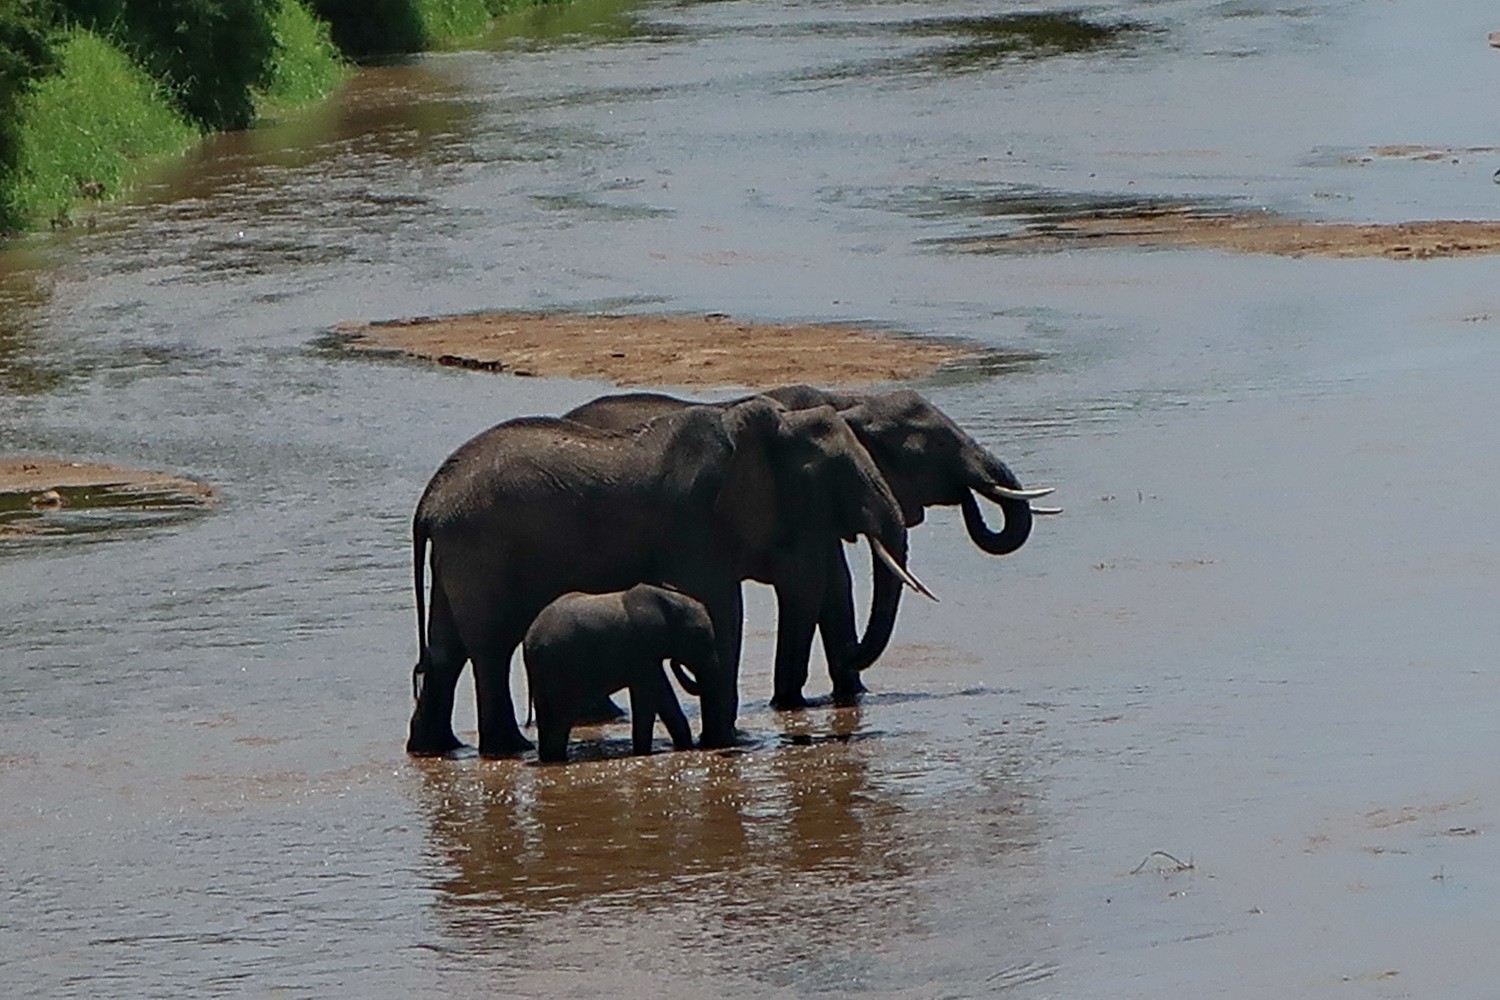 Two Elephants with a little one